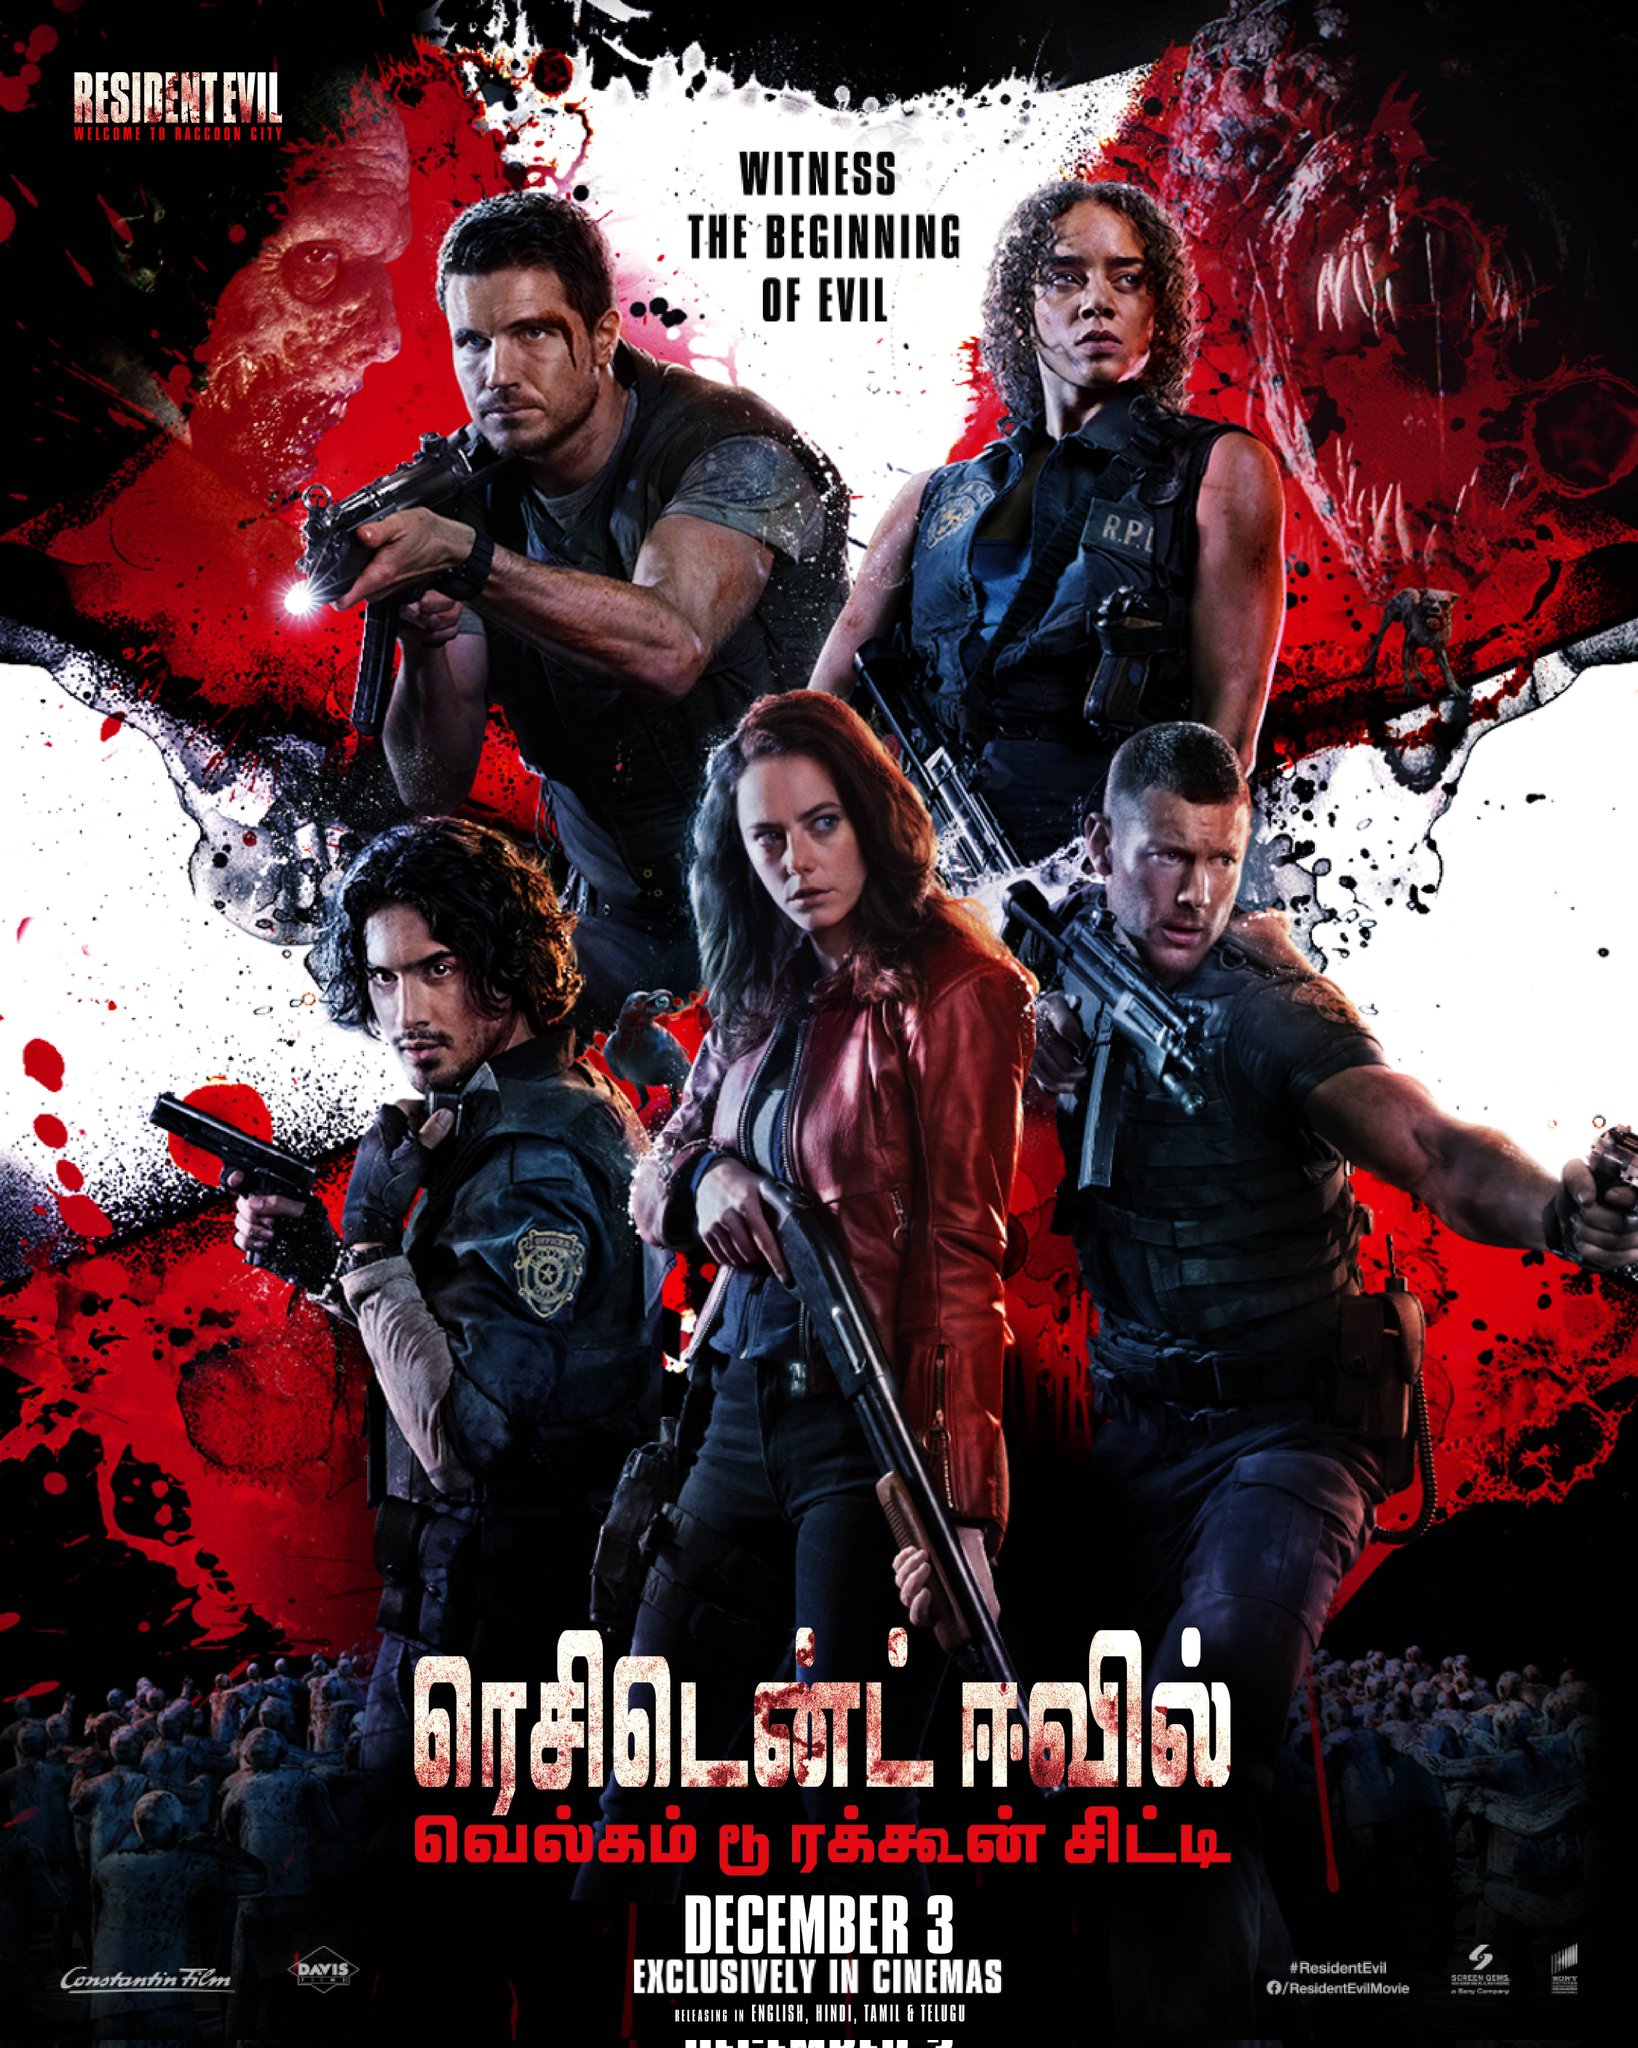 Resident Evil: Welcome to Raccoon City (2021) HDRip Tamil Movie Watch Online Free